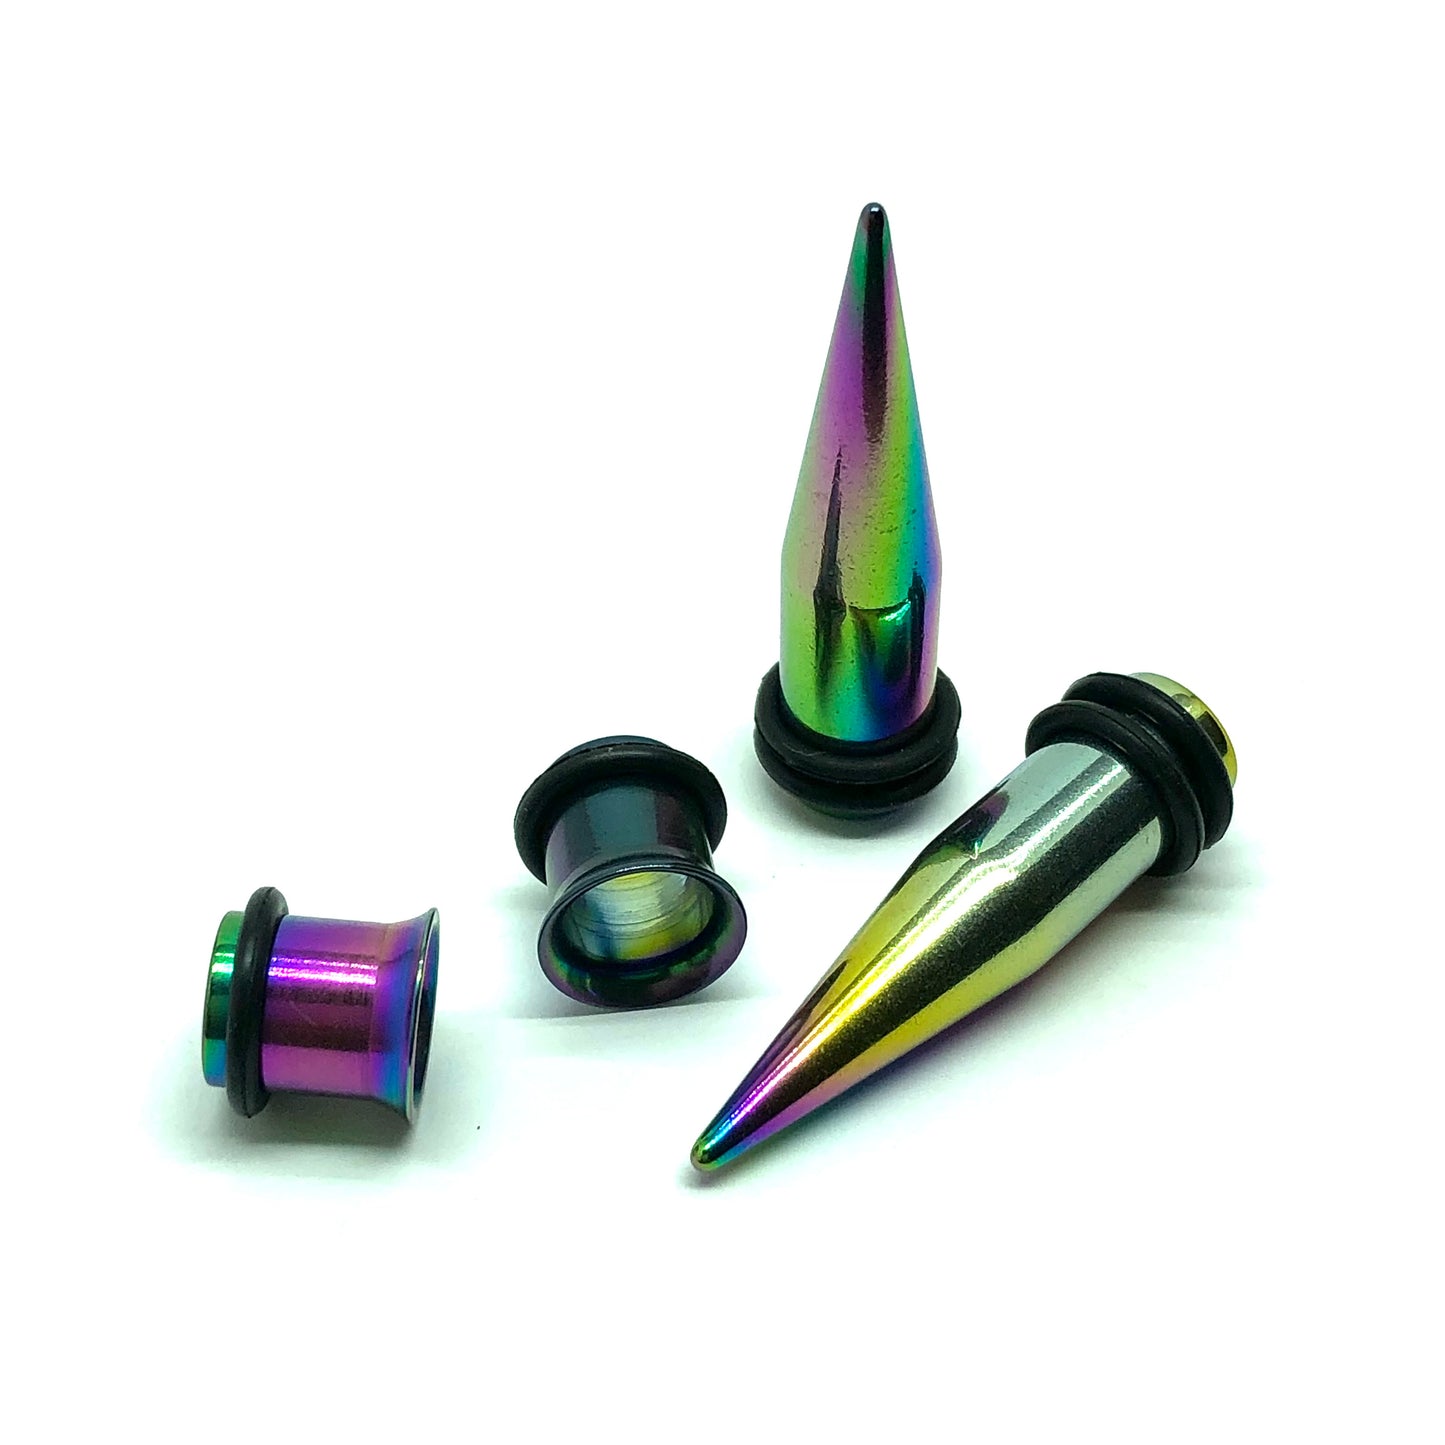  Ear Gauges Tapers and Plugs set Rainbow oil slick style 0G 8mm 